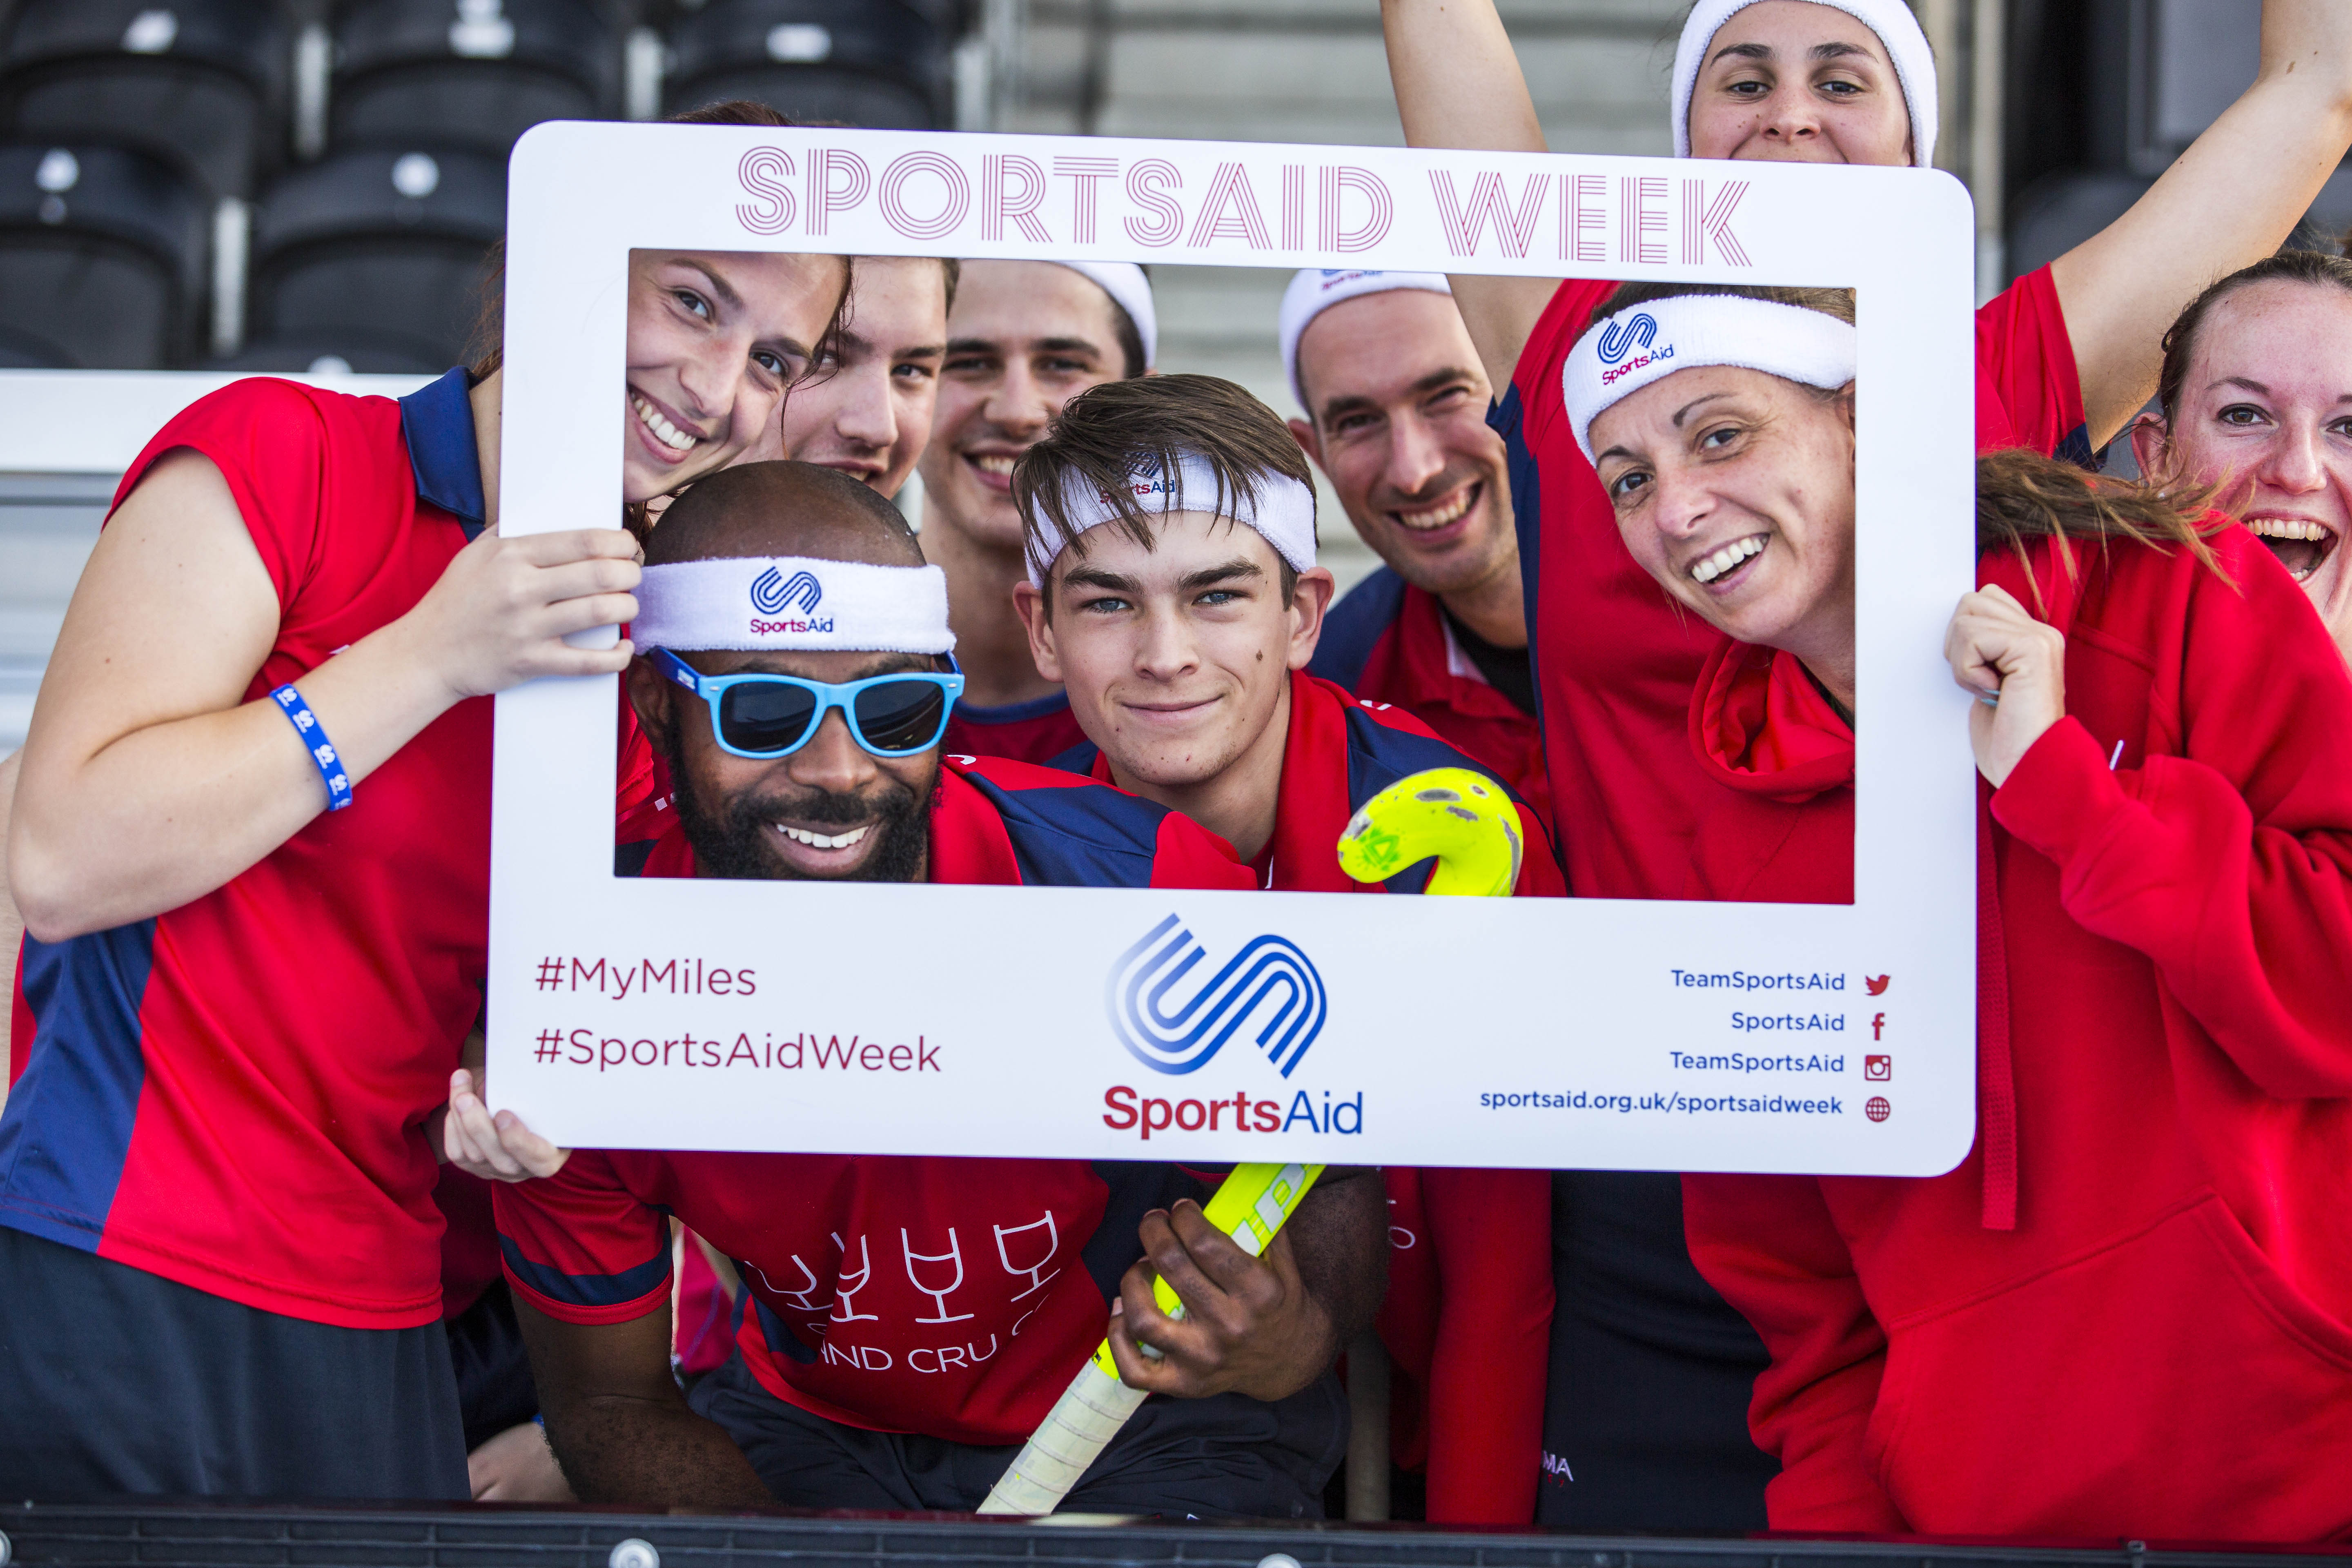 Request Your SportsAid Week 2018 Fundraising Pack Today – Just One Month To Go!